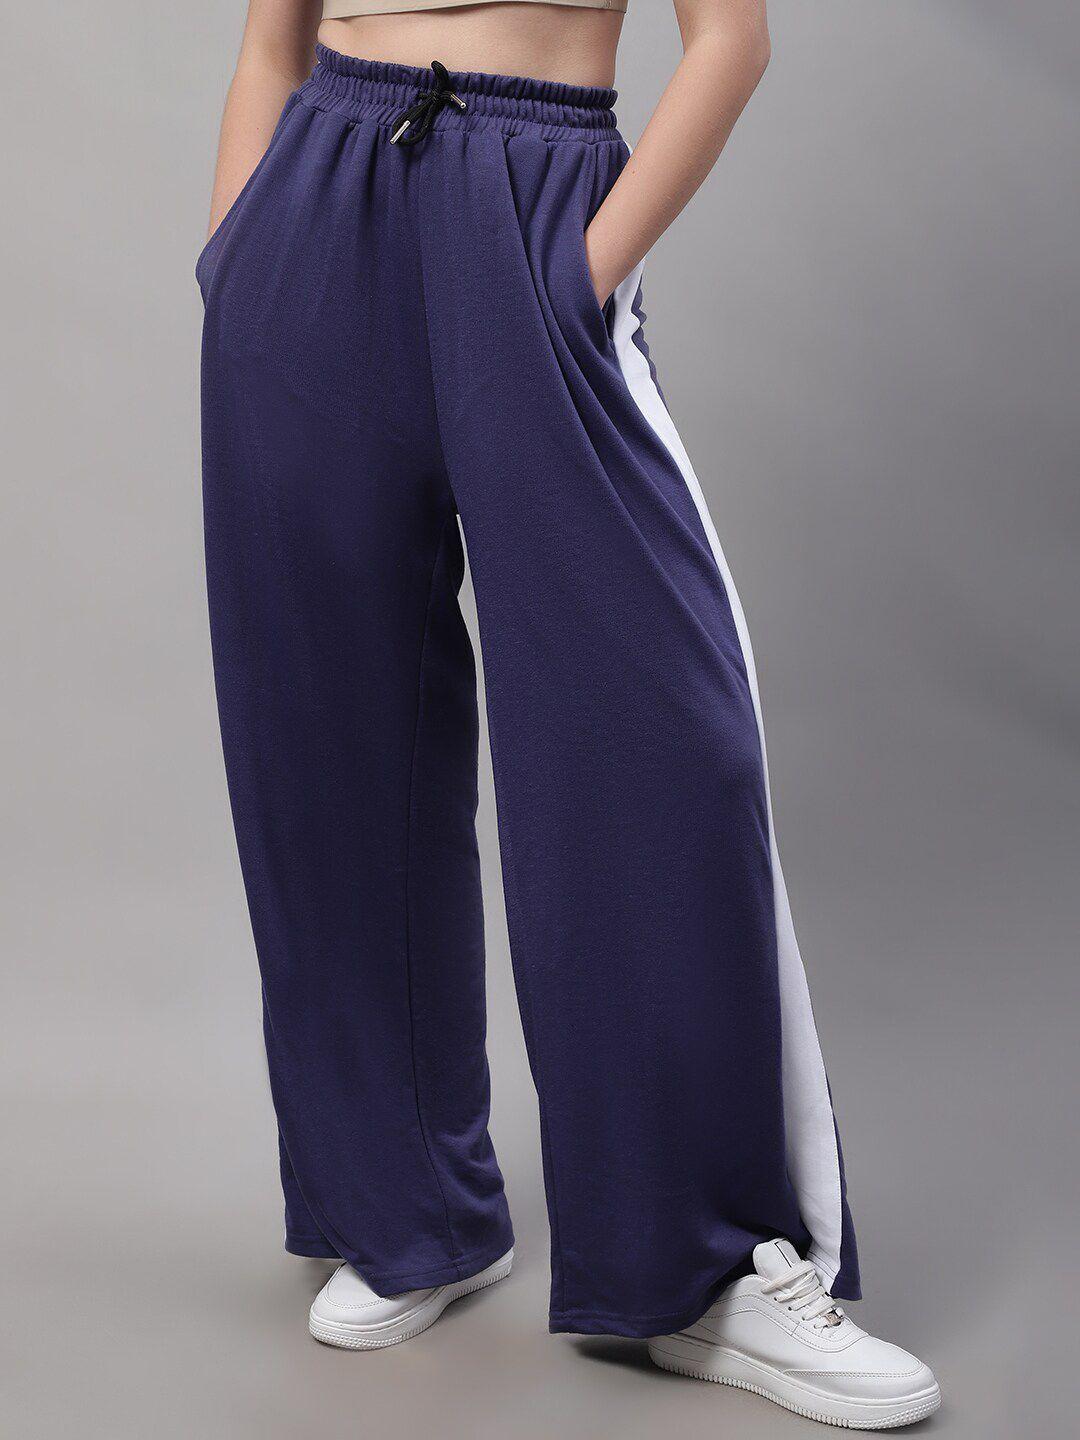 door74 women colourblocked relaxed fit cotton track pants